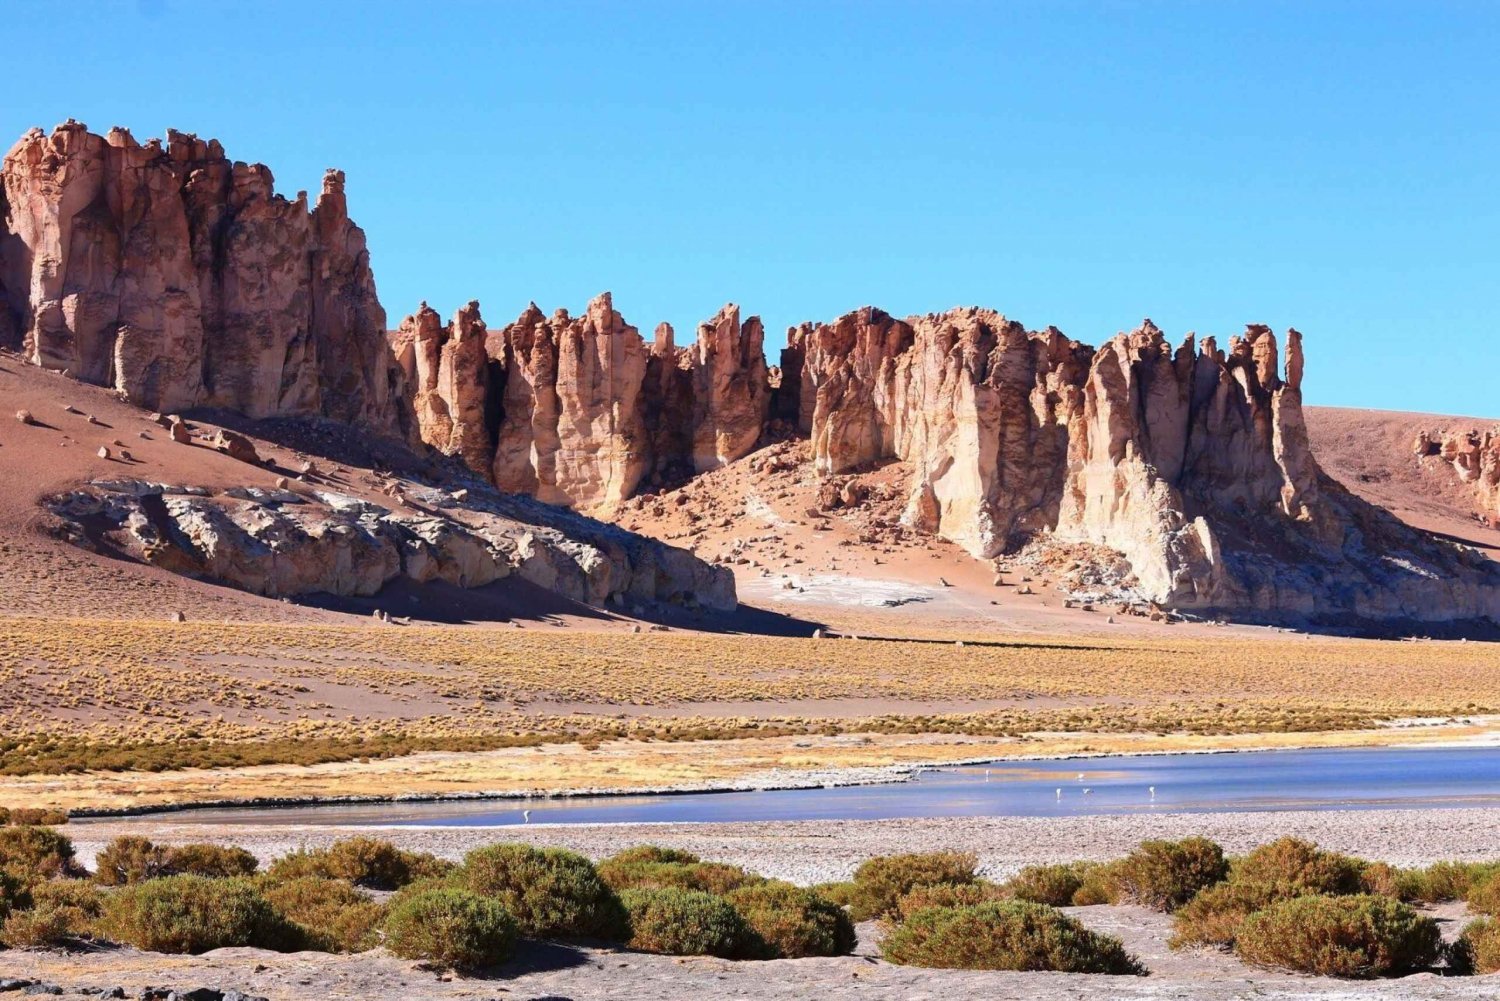 Explore The Atacama Desert and The Valley of Moon on a bike